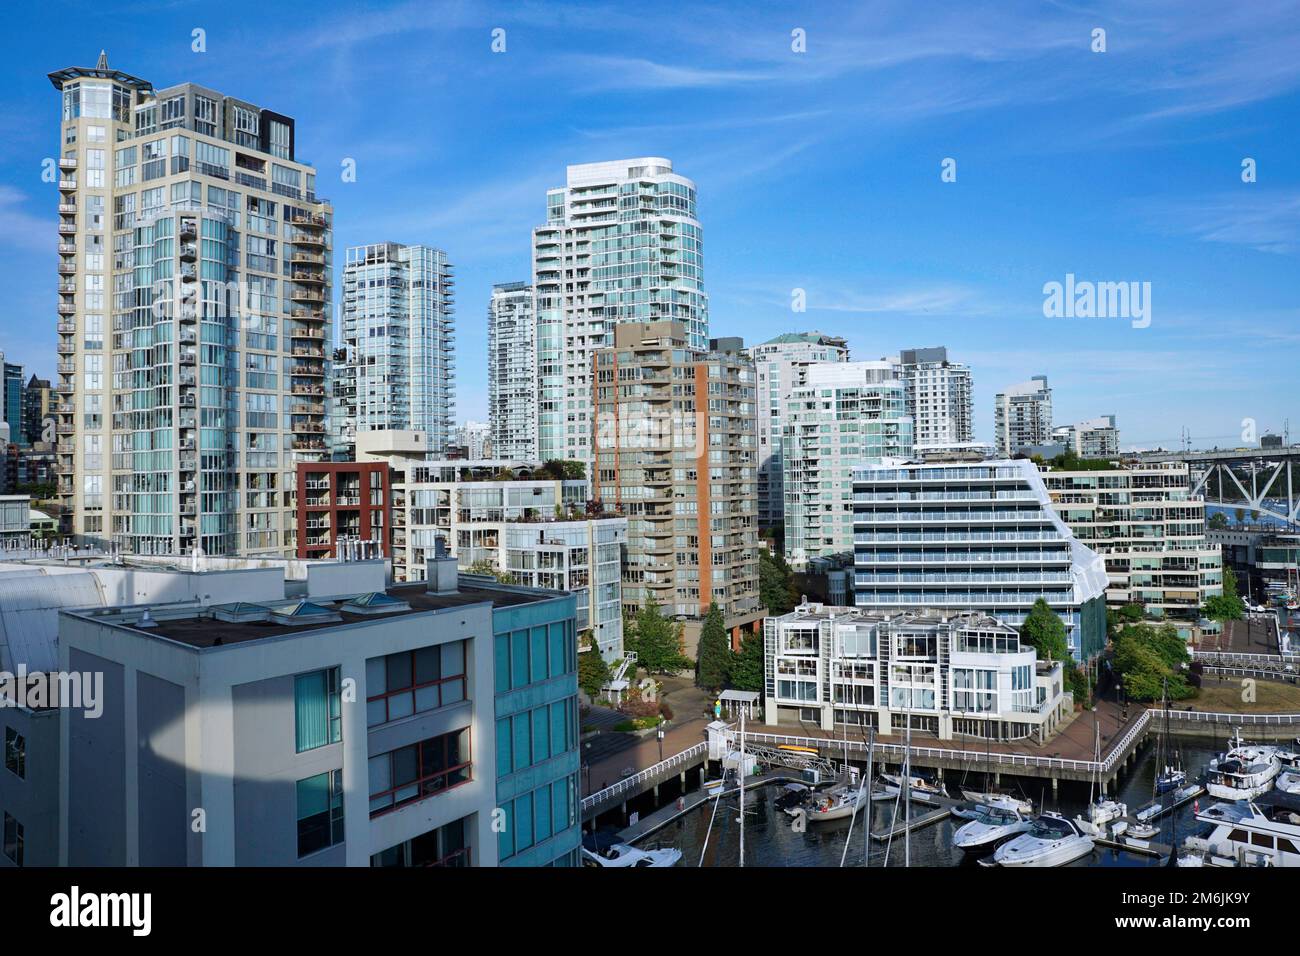 Waterfront apartment building community near the Burrard Inlet area of Vancouver Stock Photo